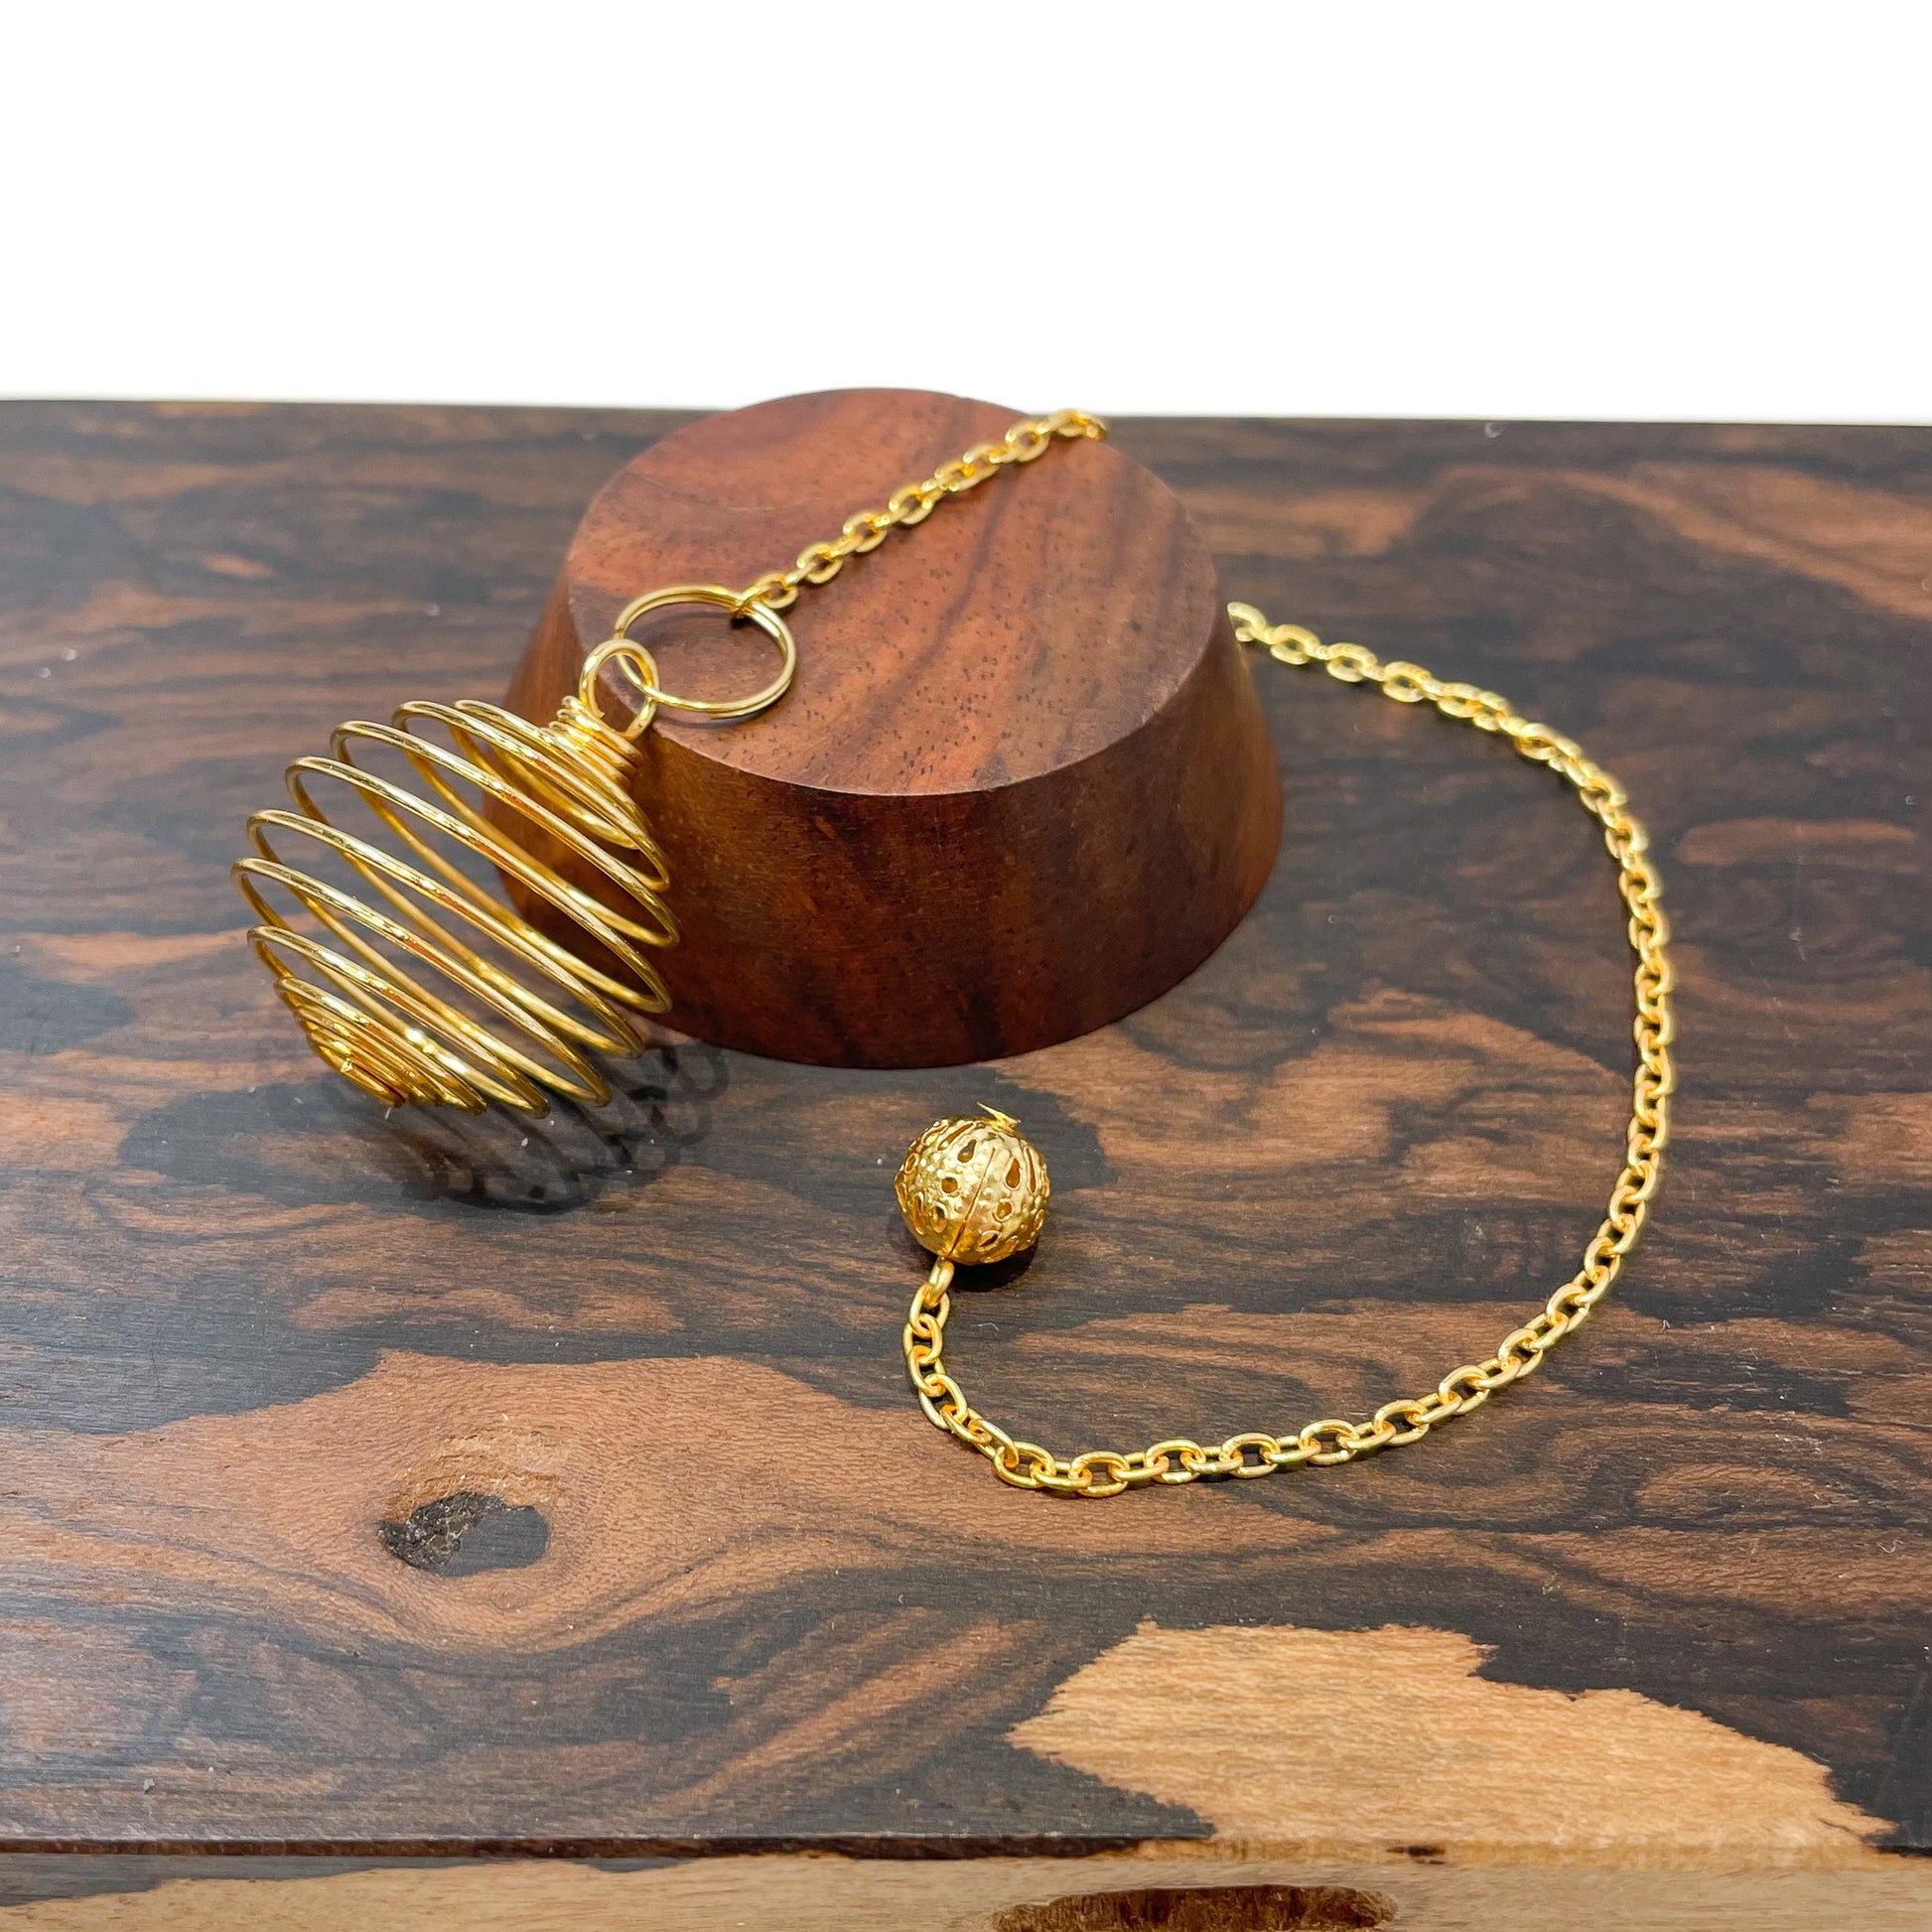 Pendulum Cage (Gold Plated) - 1 pc.